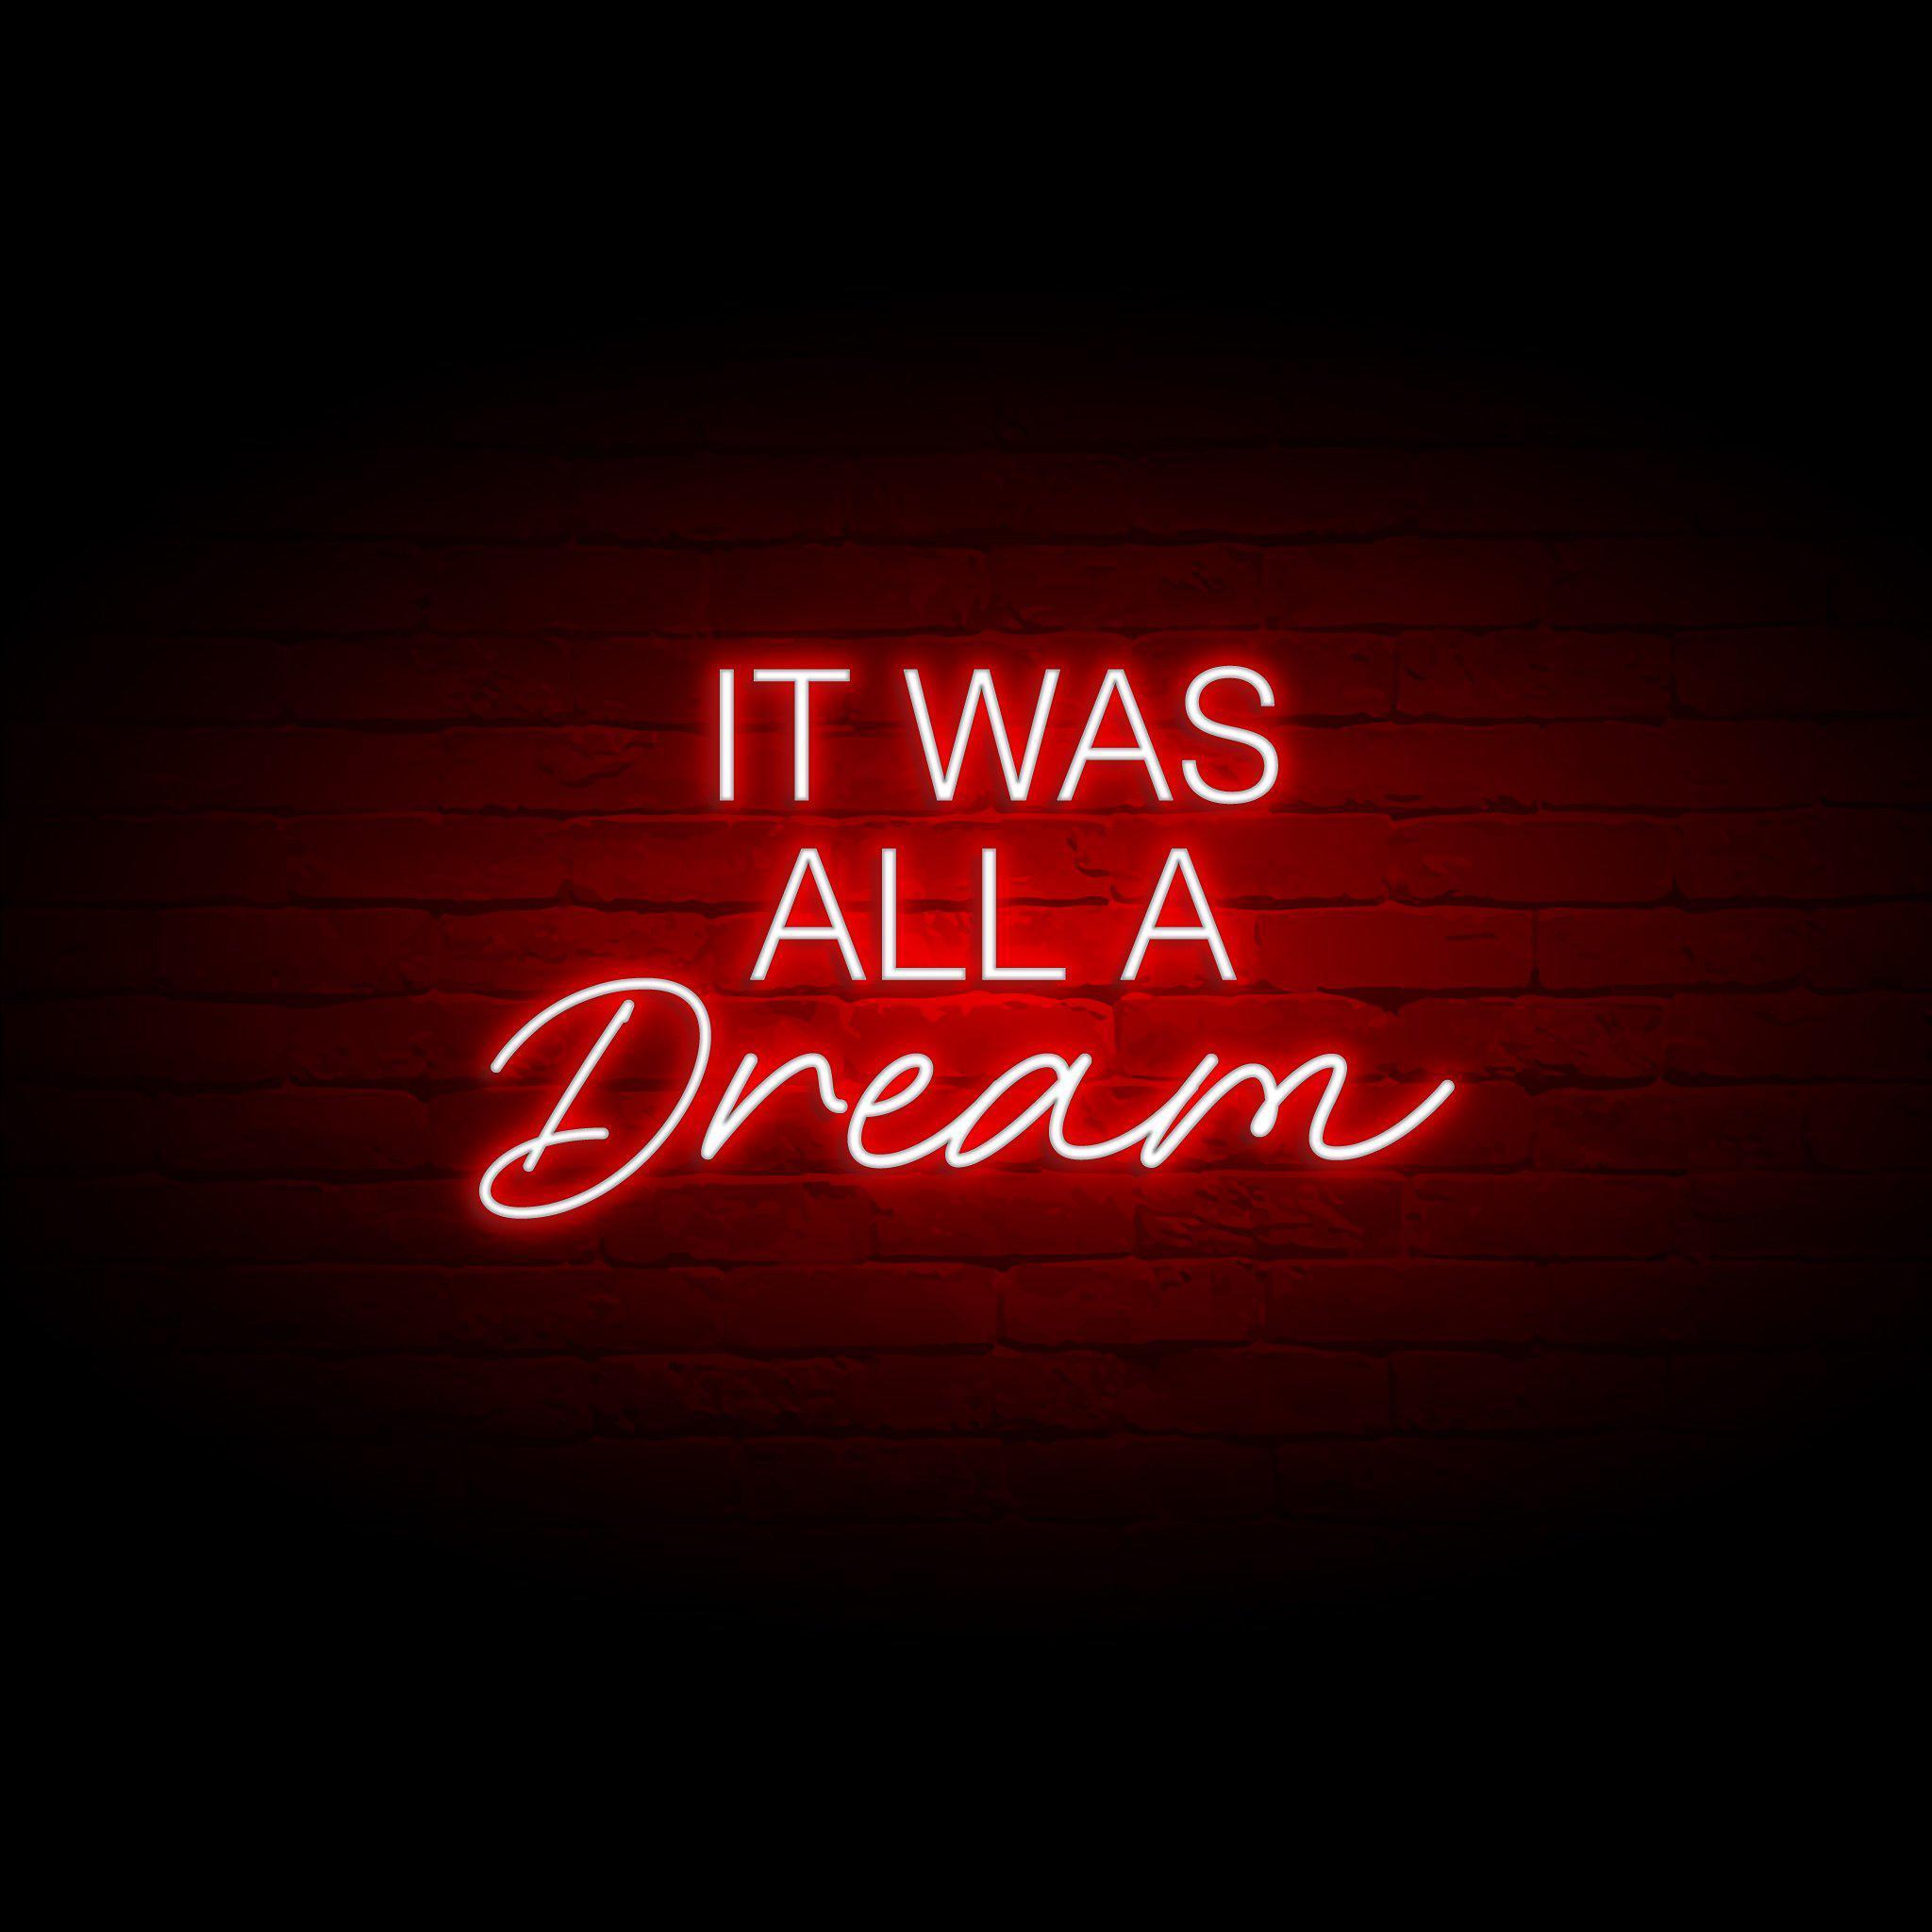 'IT WAS ALL A DREAM' NEON SIGN